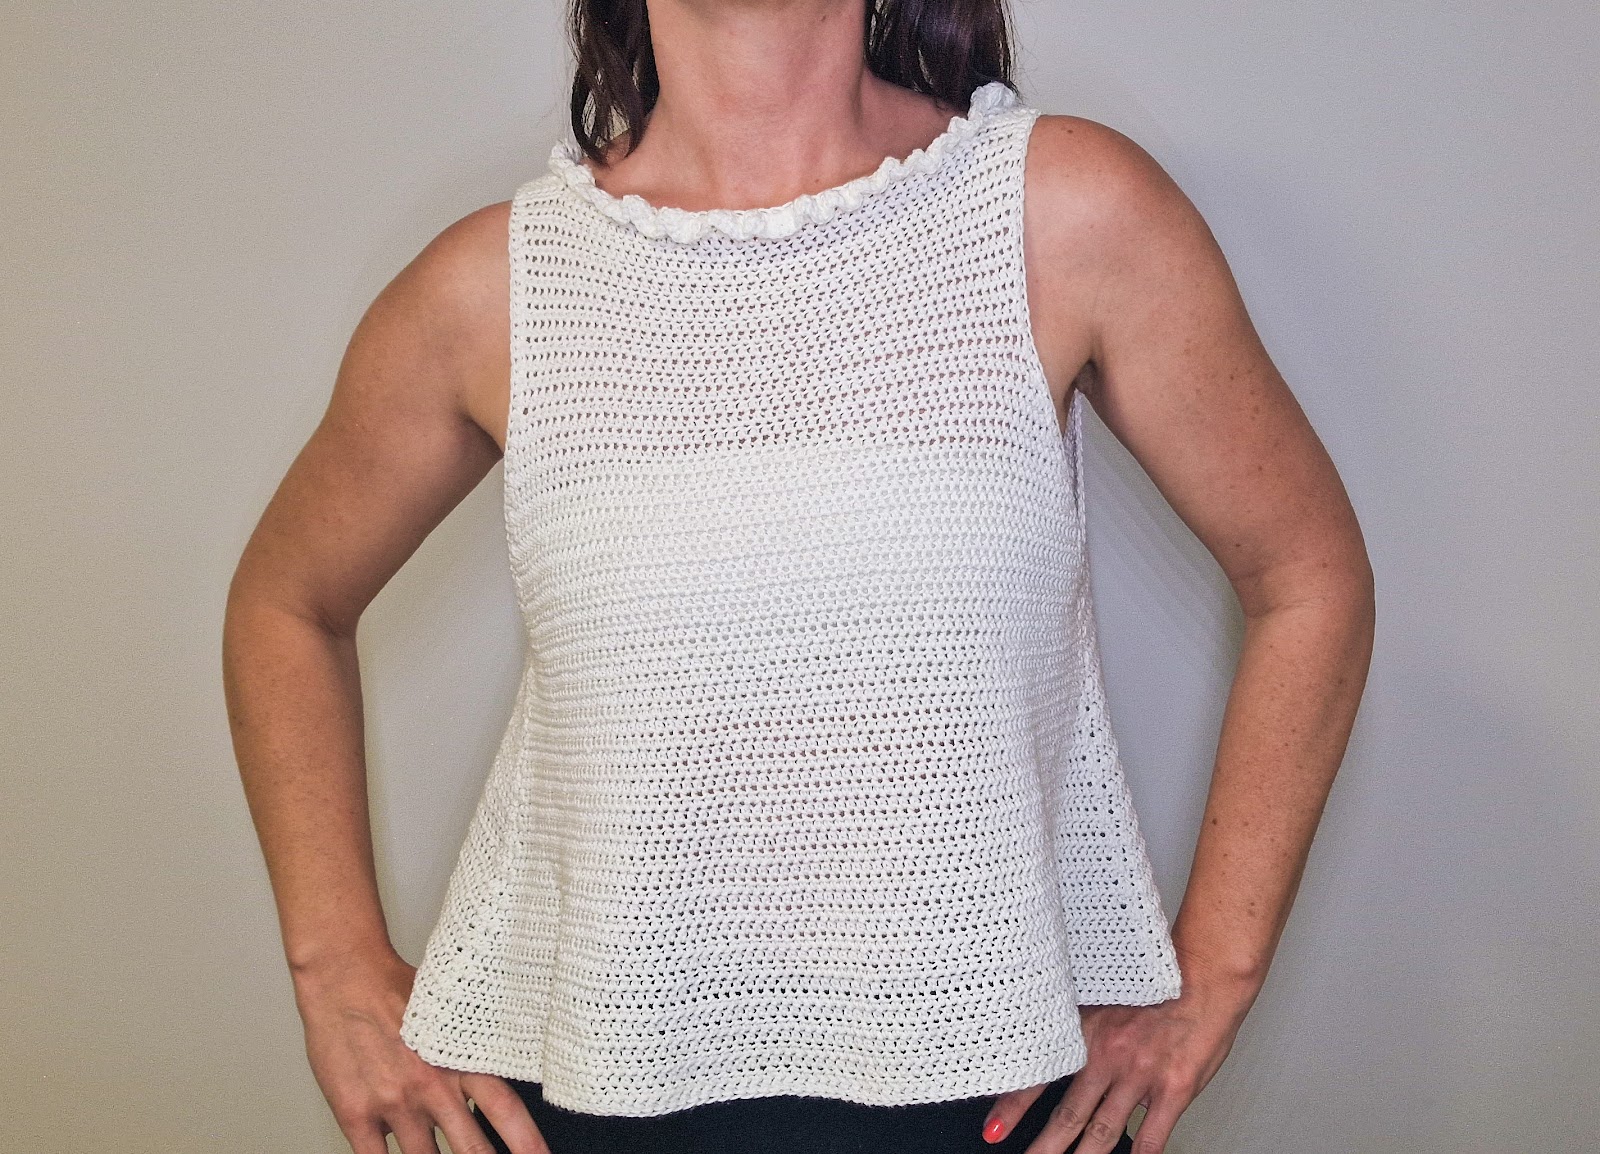 How to Crochet a Sleeveless Triangle Top